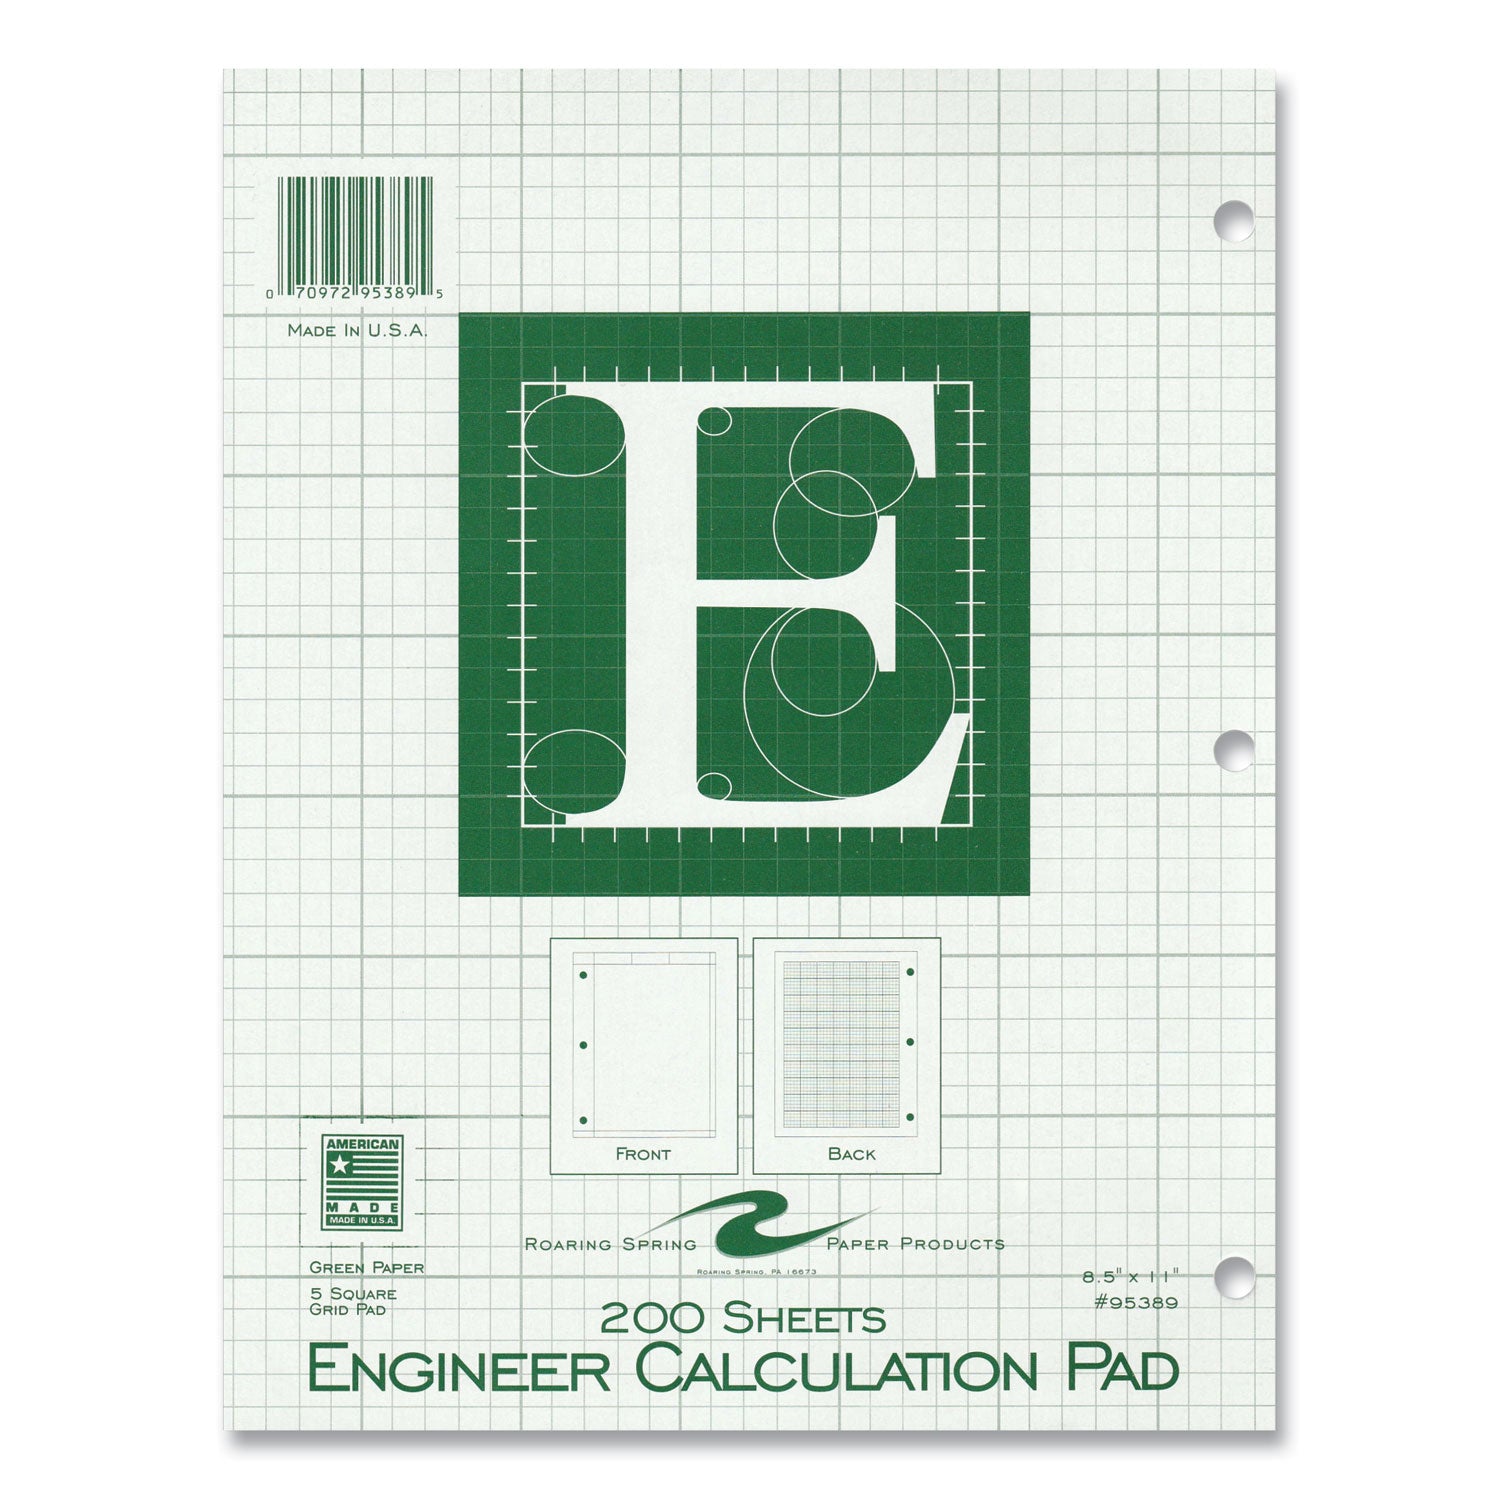 engineer-pad-05-margins-quad-rule-5-sq-in-1-sq-in-200-lt-green-85x11-sheets-pad-12-ct-ships-in-4-6-business-days_roa95389cs - 7